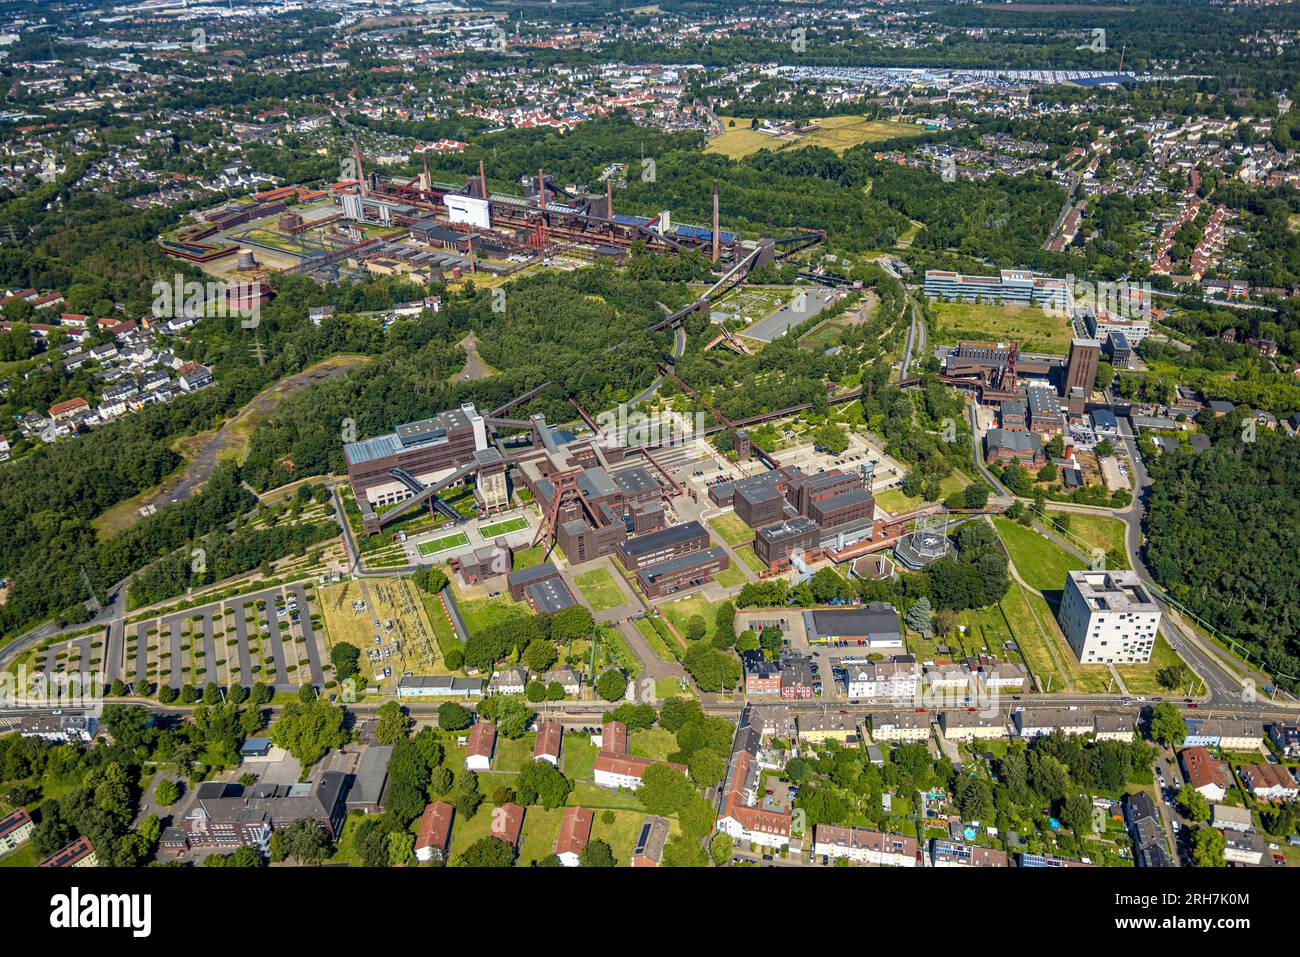 Aerial view, Zollverein Colliery, UNESCO World Heritage Site, architectural and industrial monument, SANAA building, winding tower, Ruhr Museum, Stopp Stock Photo